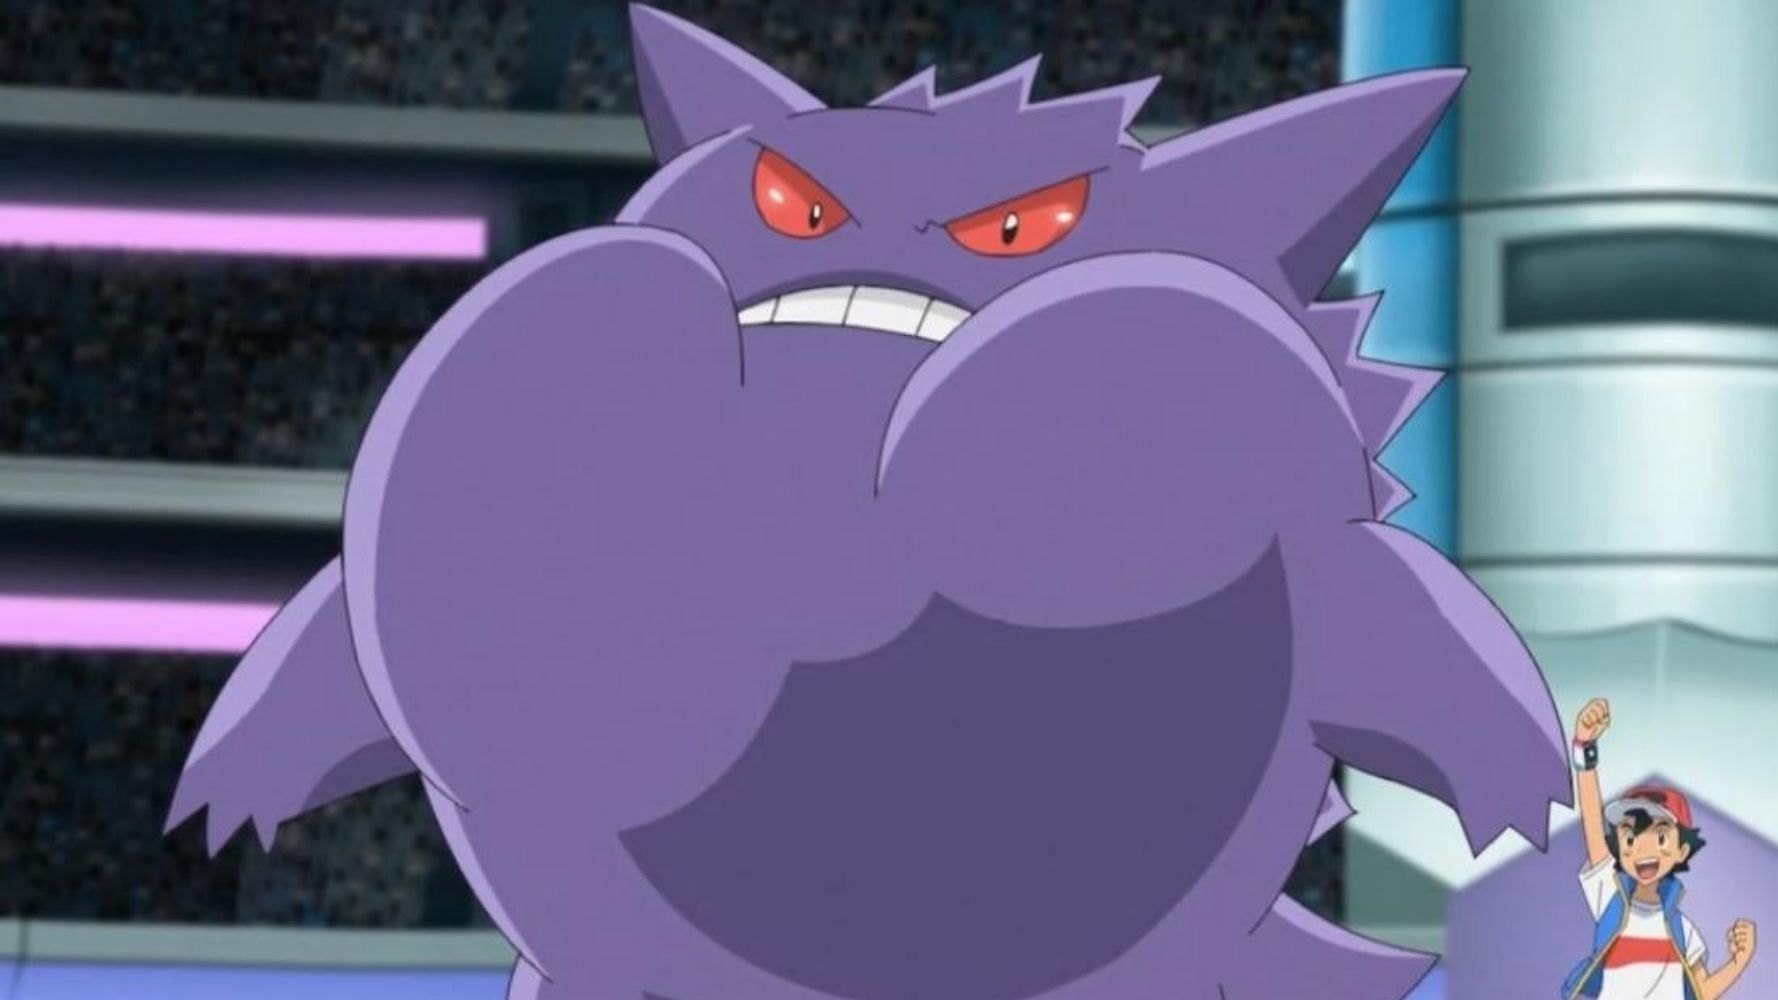 His Gengar once held a Grimmsnarl in its mouth (Image via OLM, Inc)